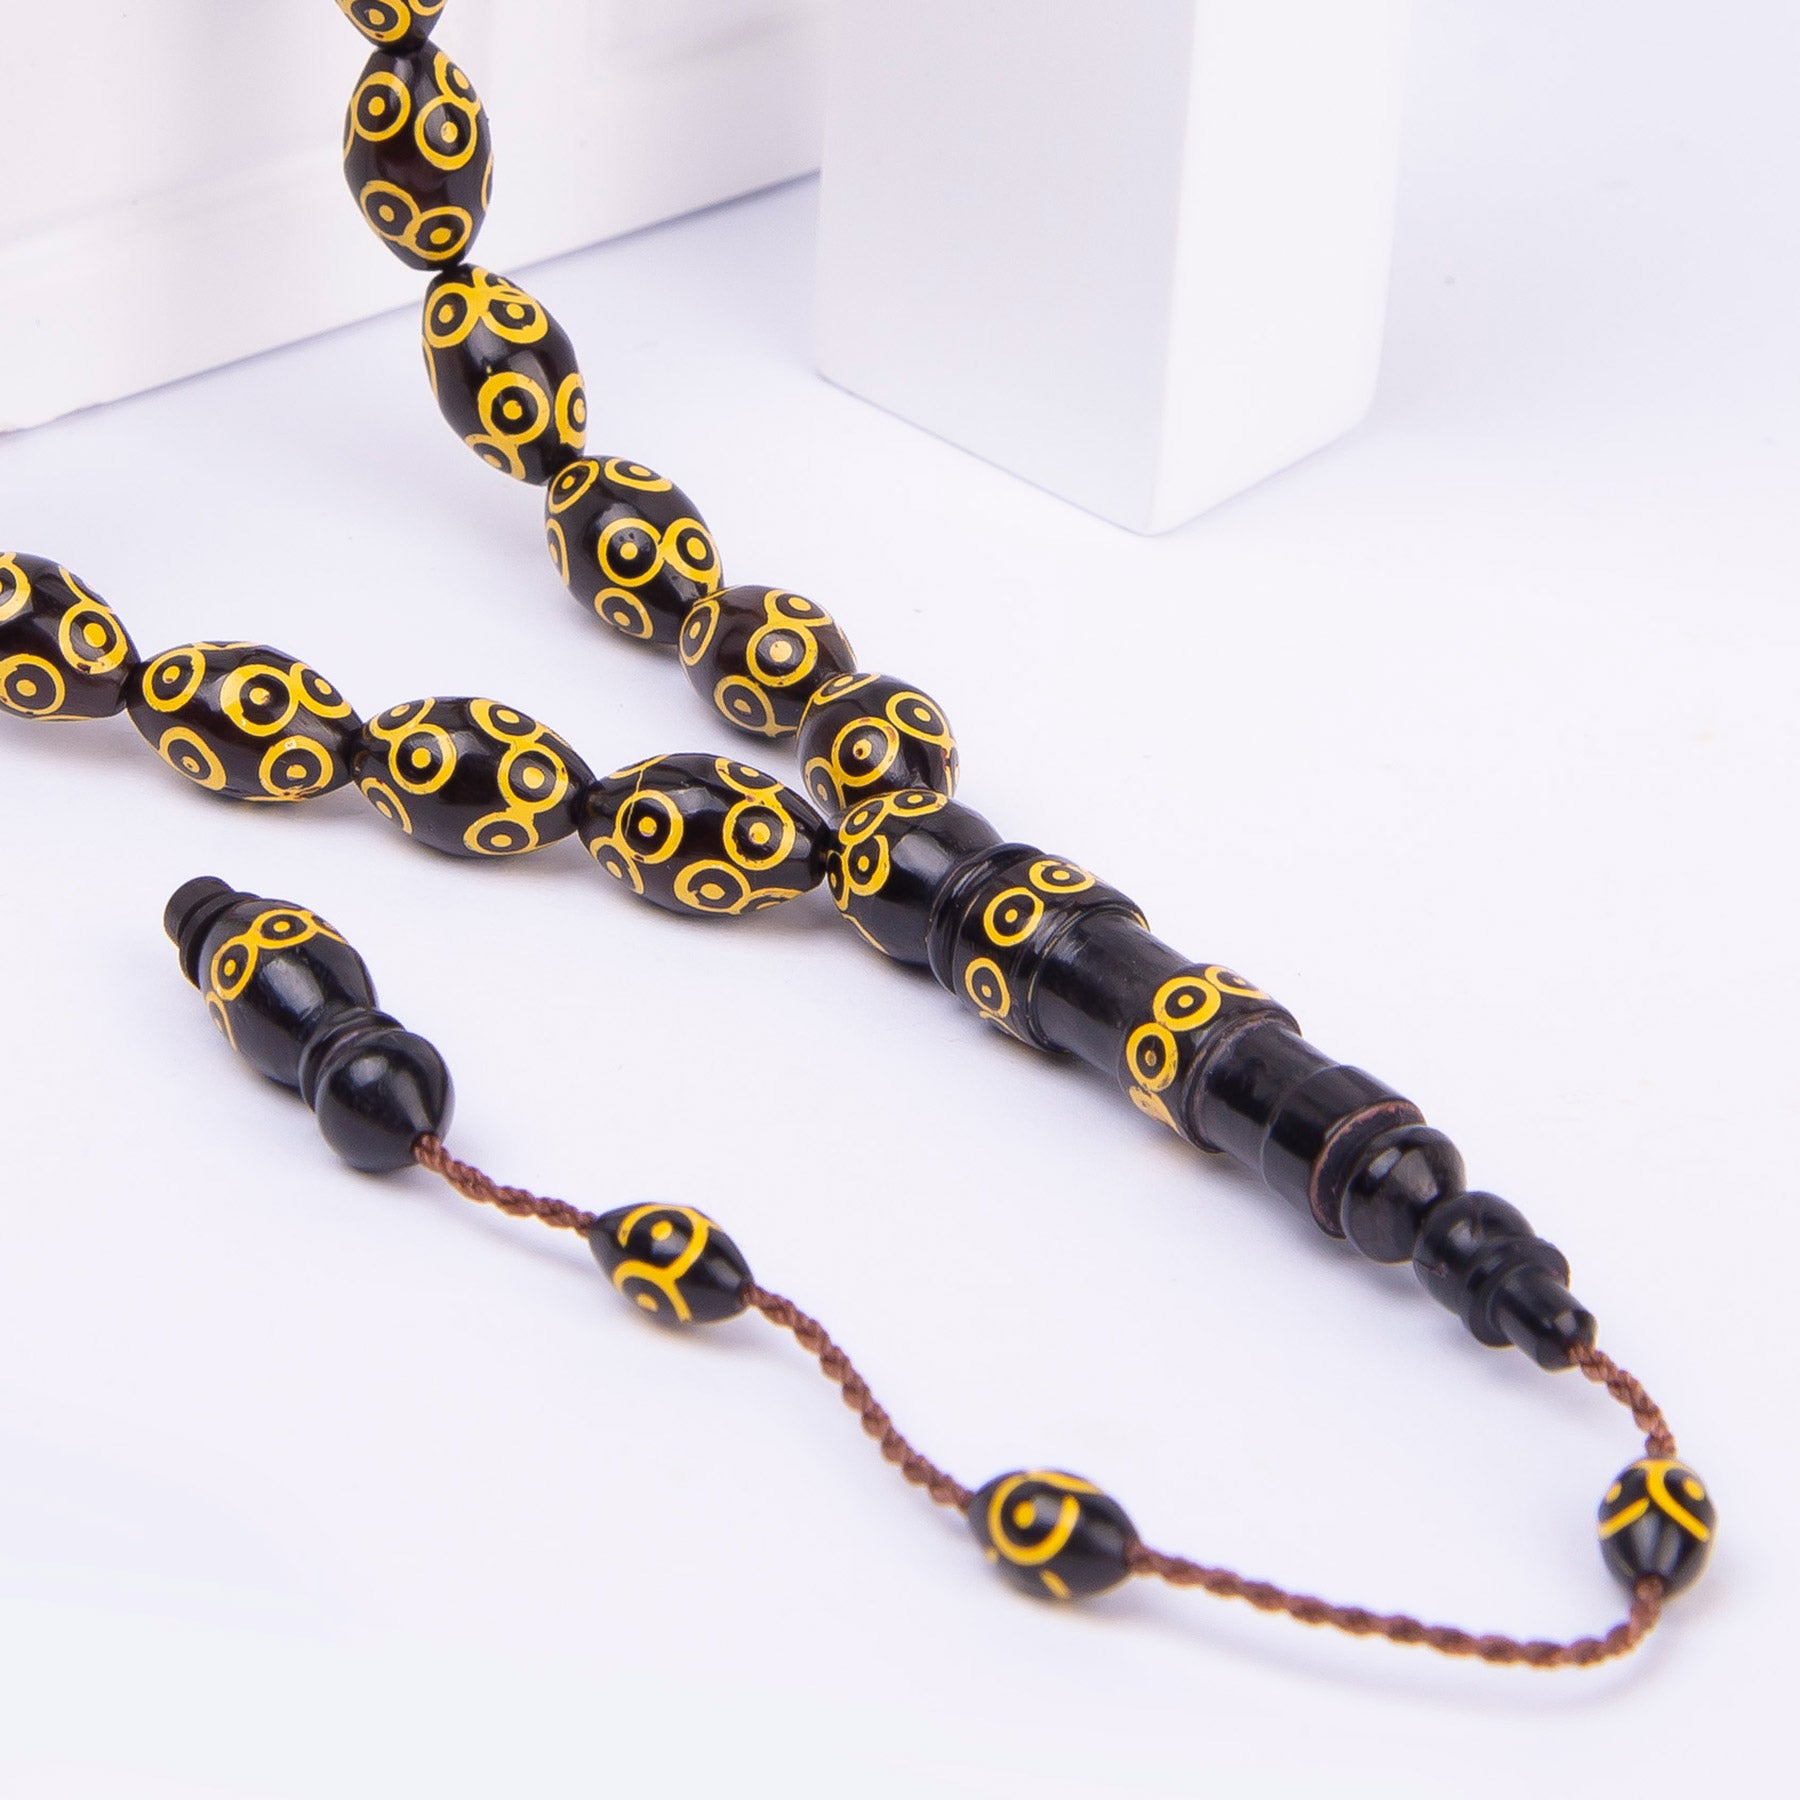 Systematic Solid Cut Embroidered Ebony Wood Prayer Beads 2